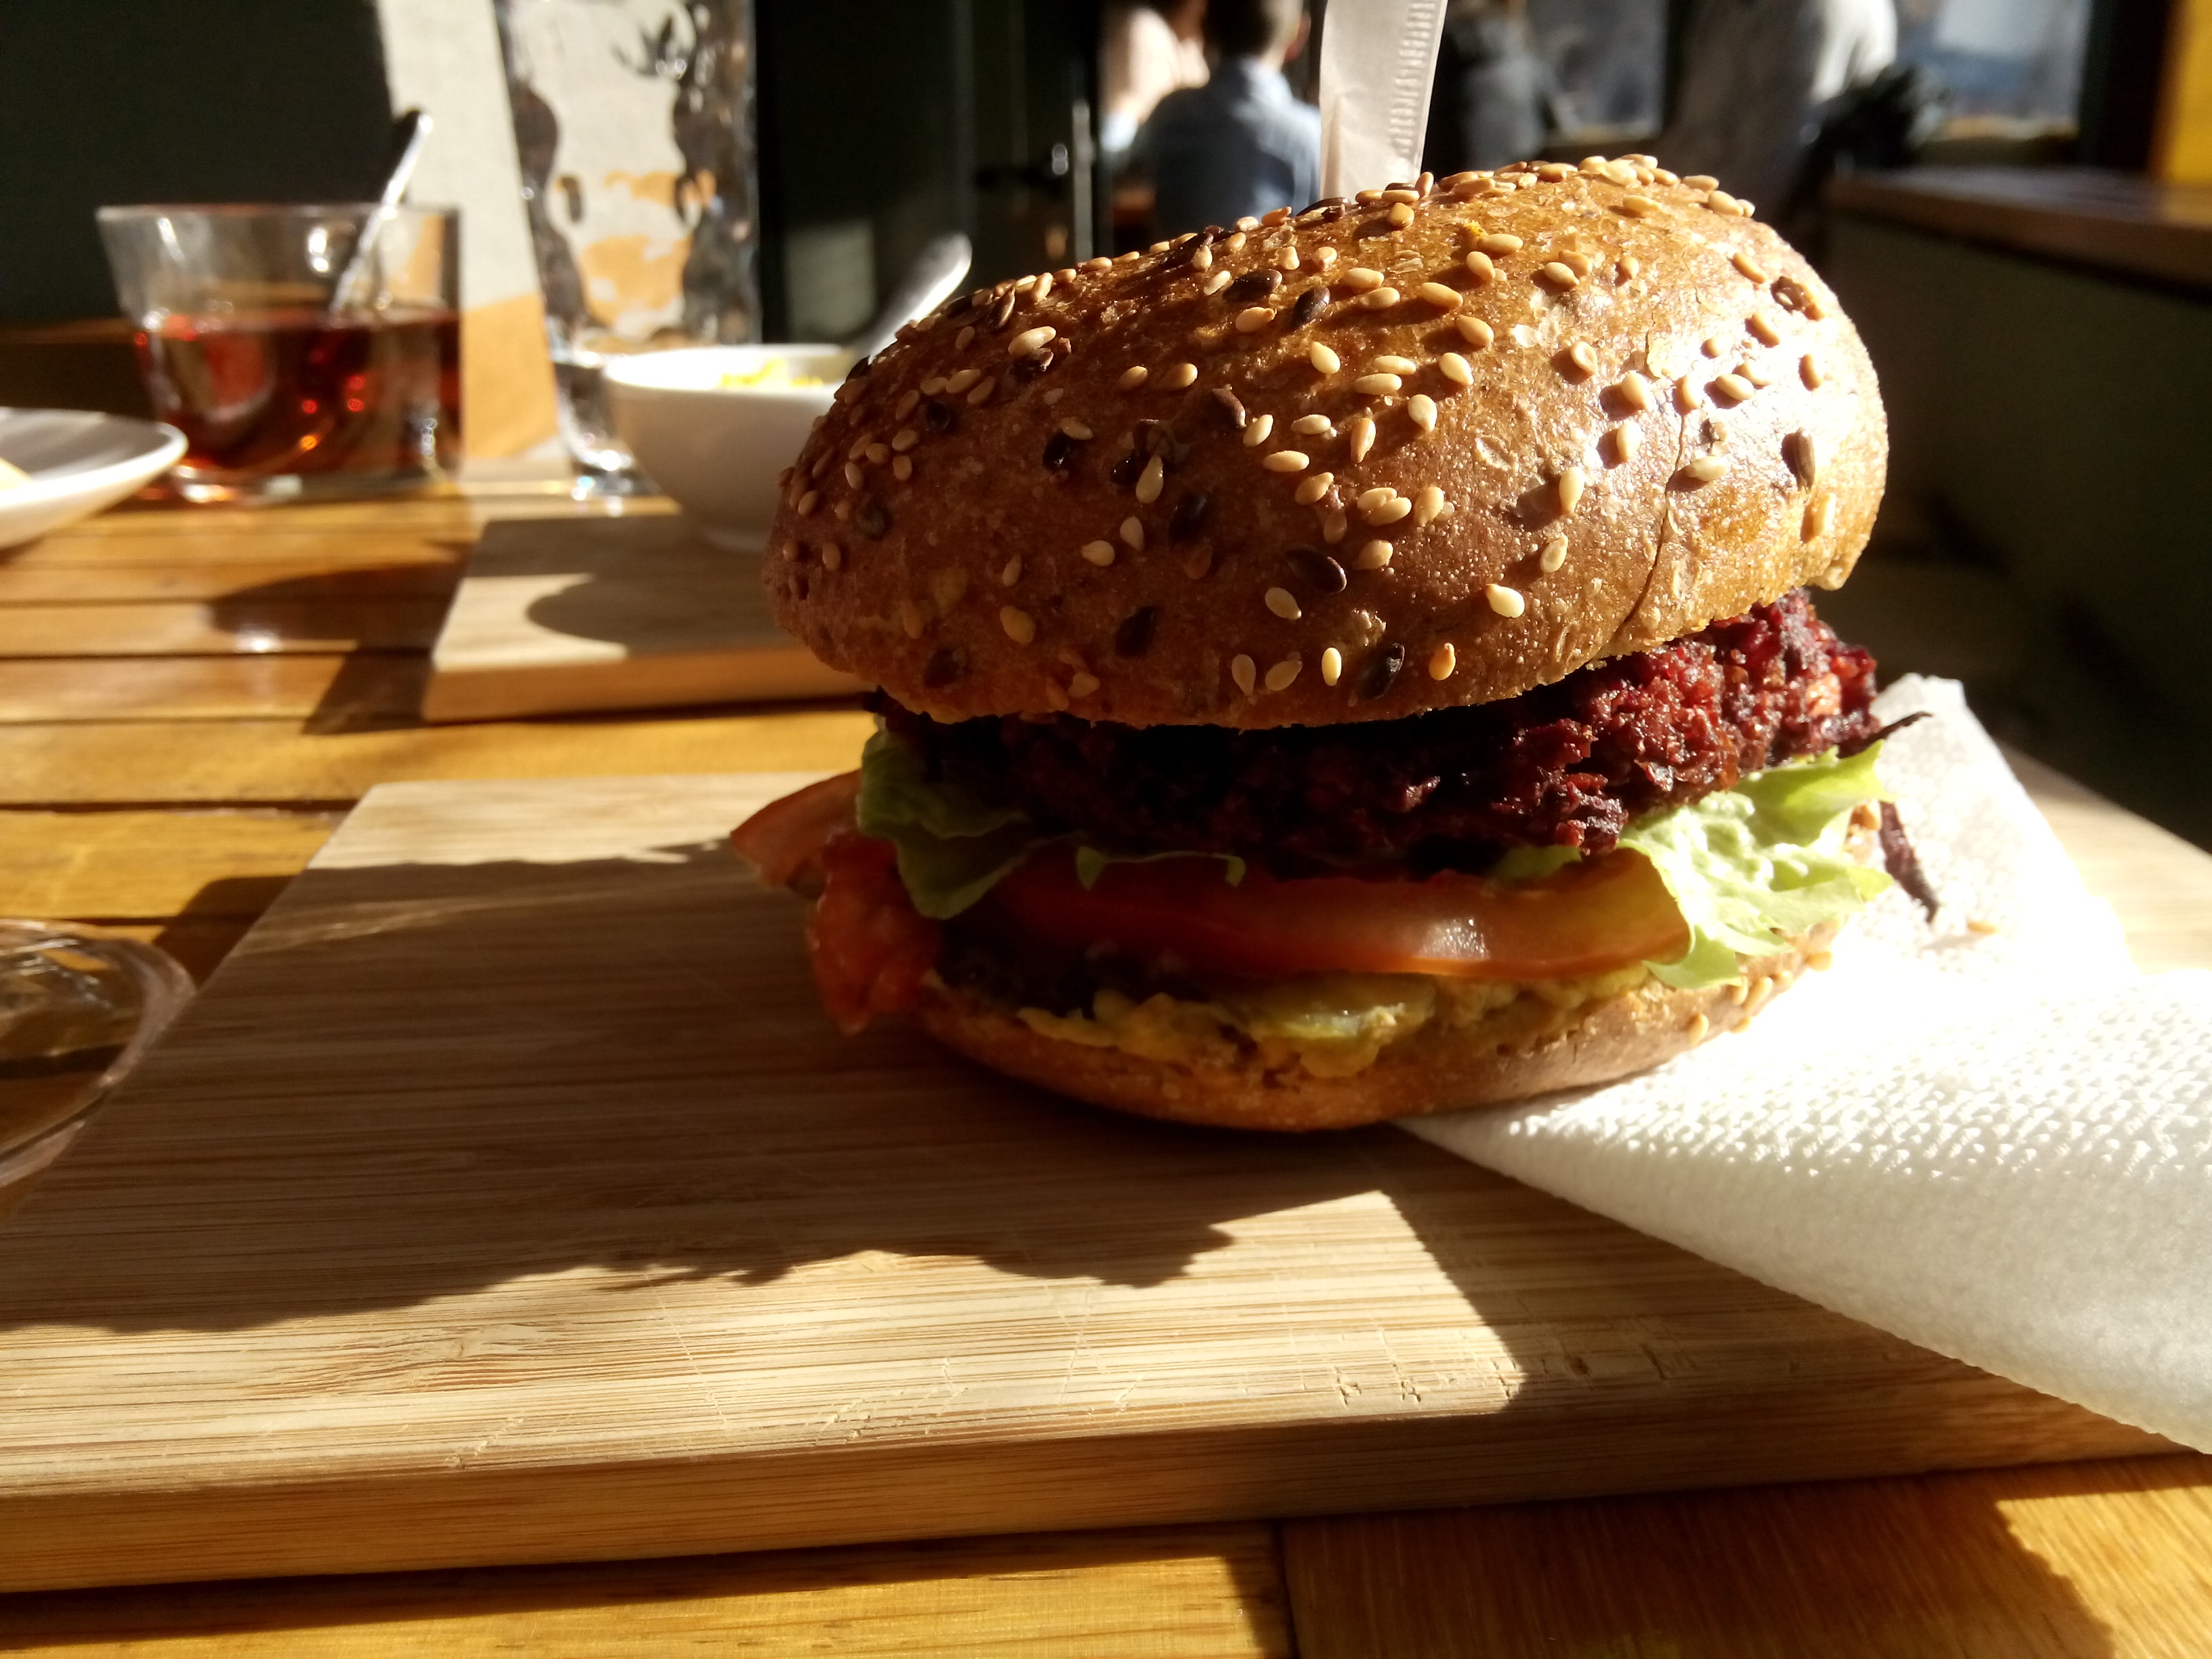 A purple burger in a seedy bun with salad on a wooden board